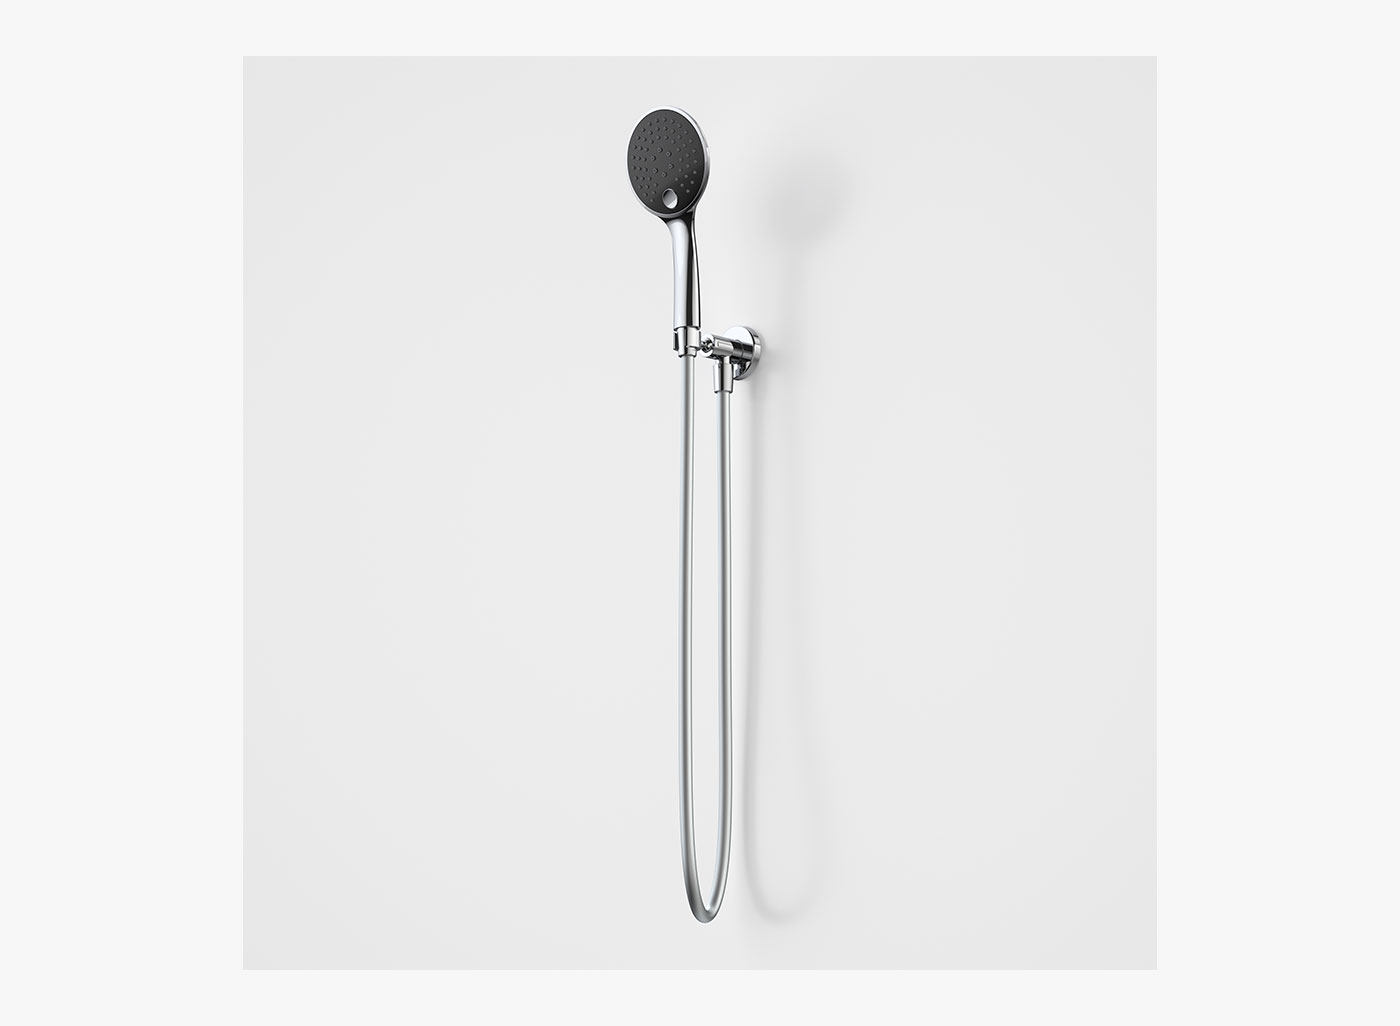 slimline design is complemented with a highlight of either a black or white on the showerhead